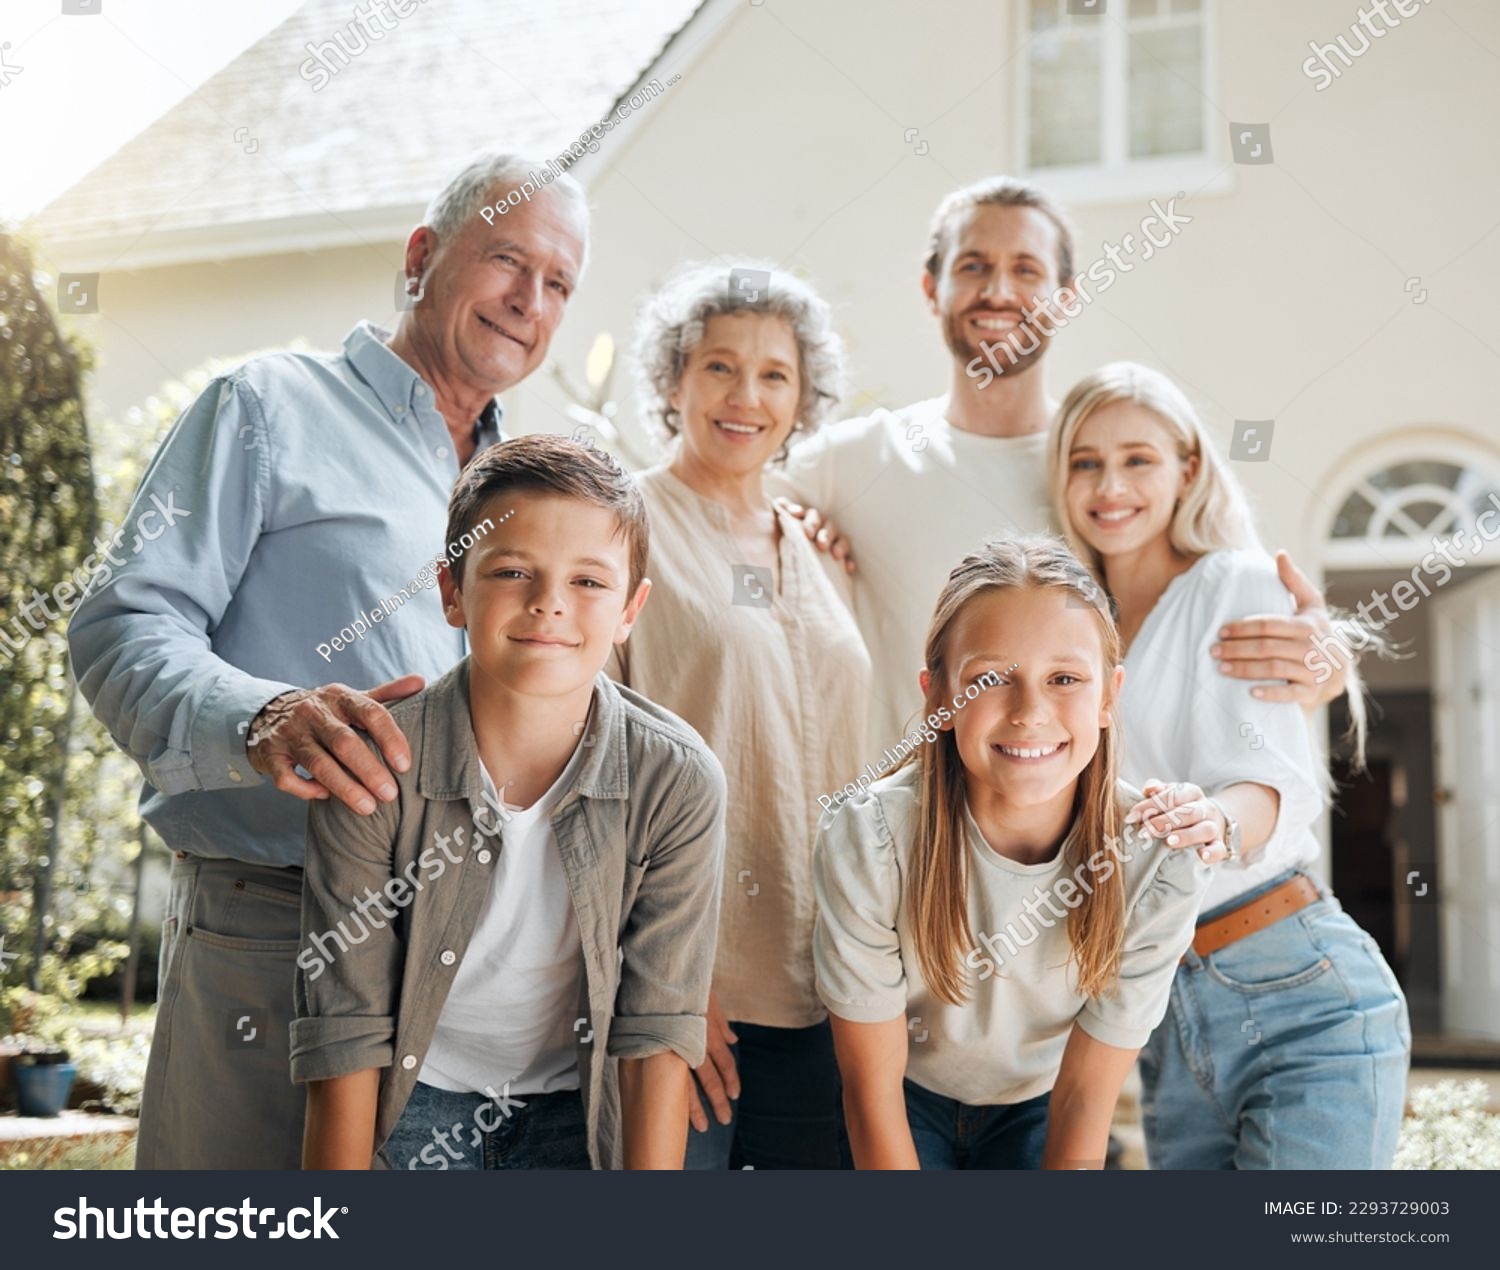 Keep your family close. Shot of a multi-generational family standing together outside. #2293729003